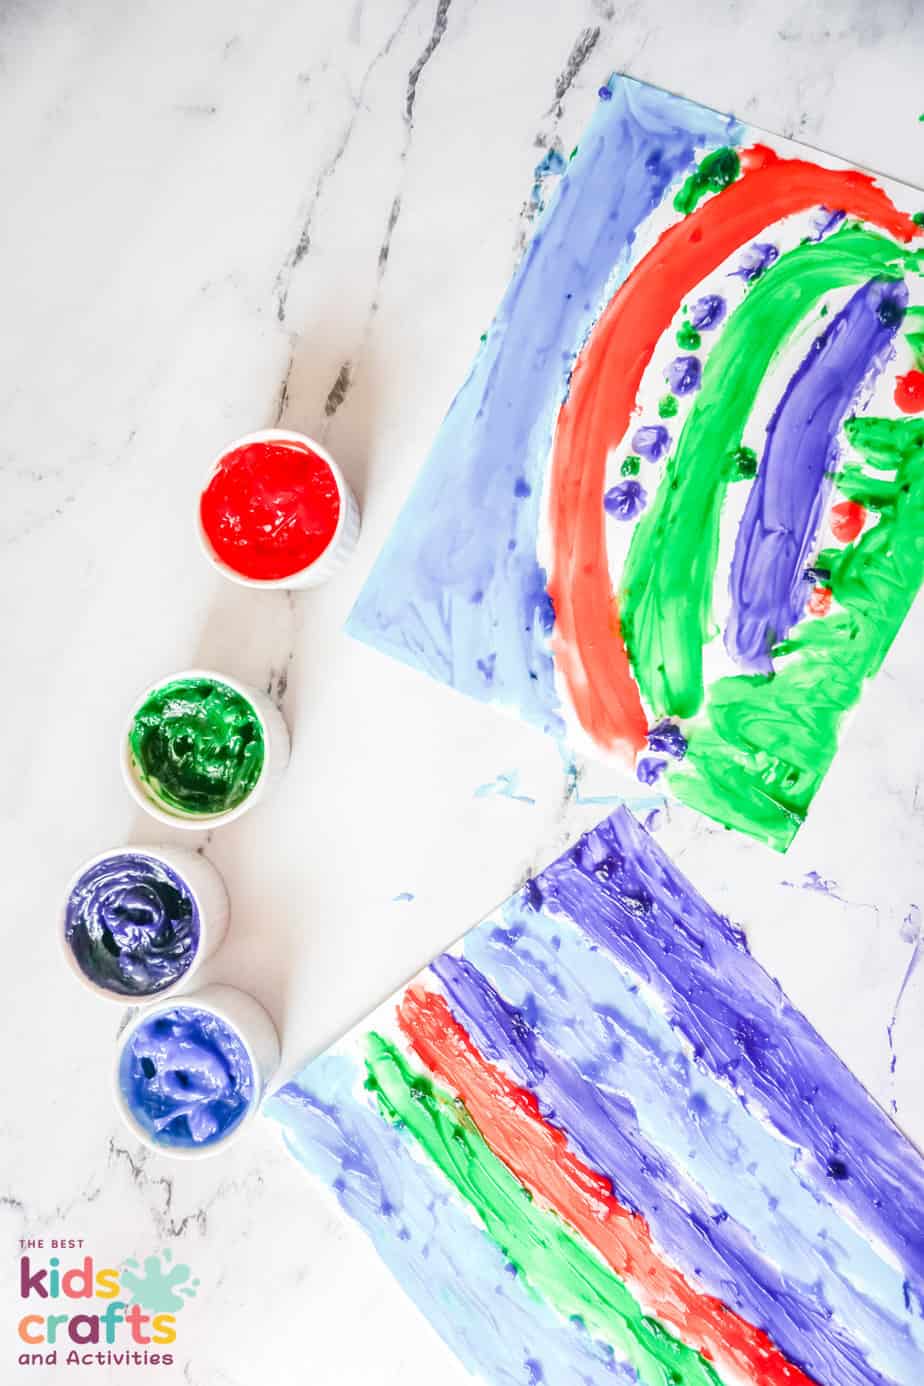 Paintings made with homemade finger paints